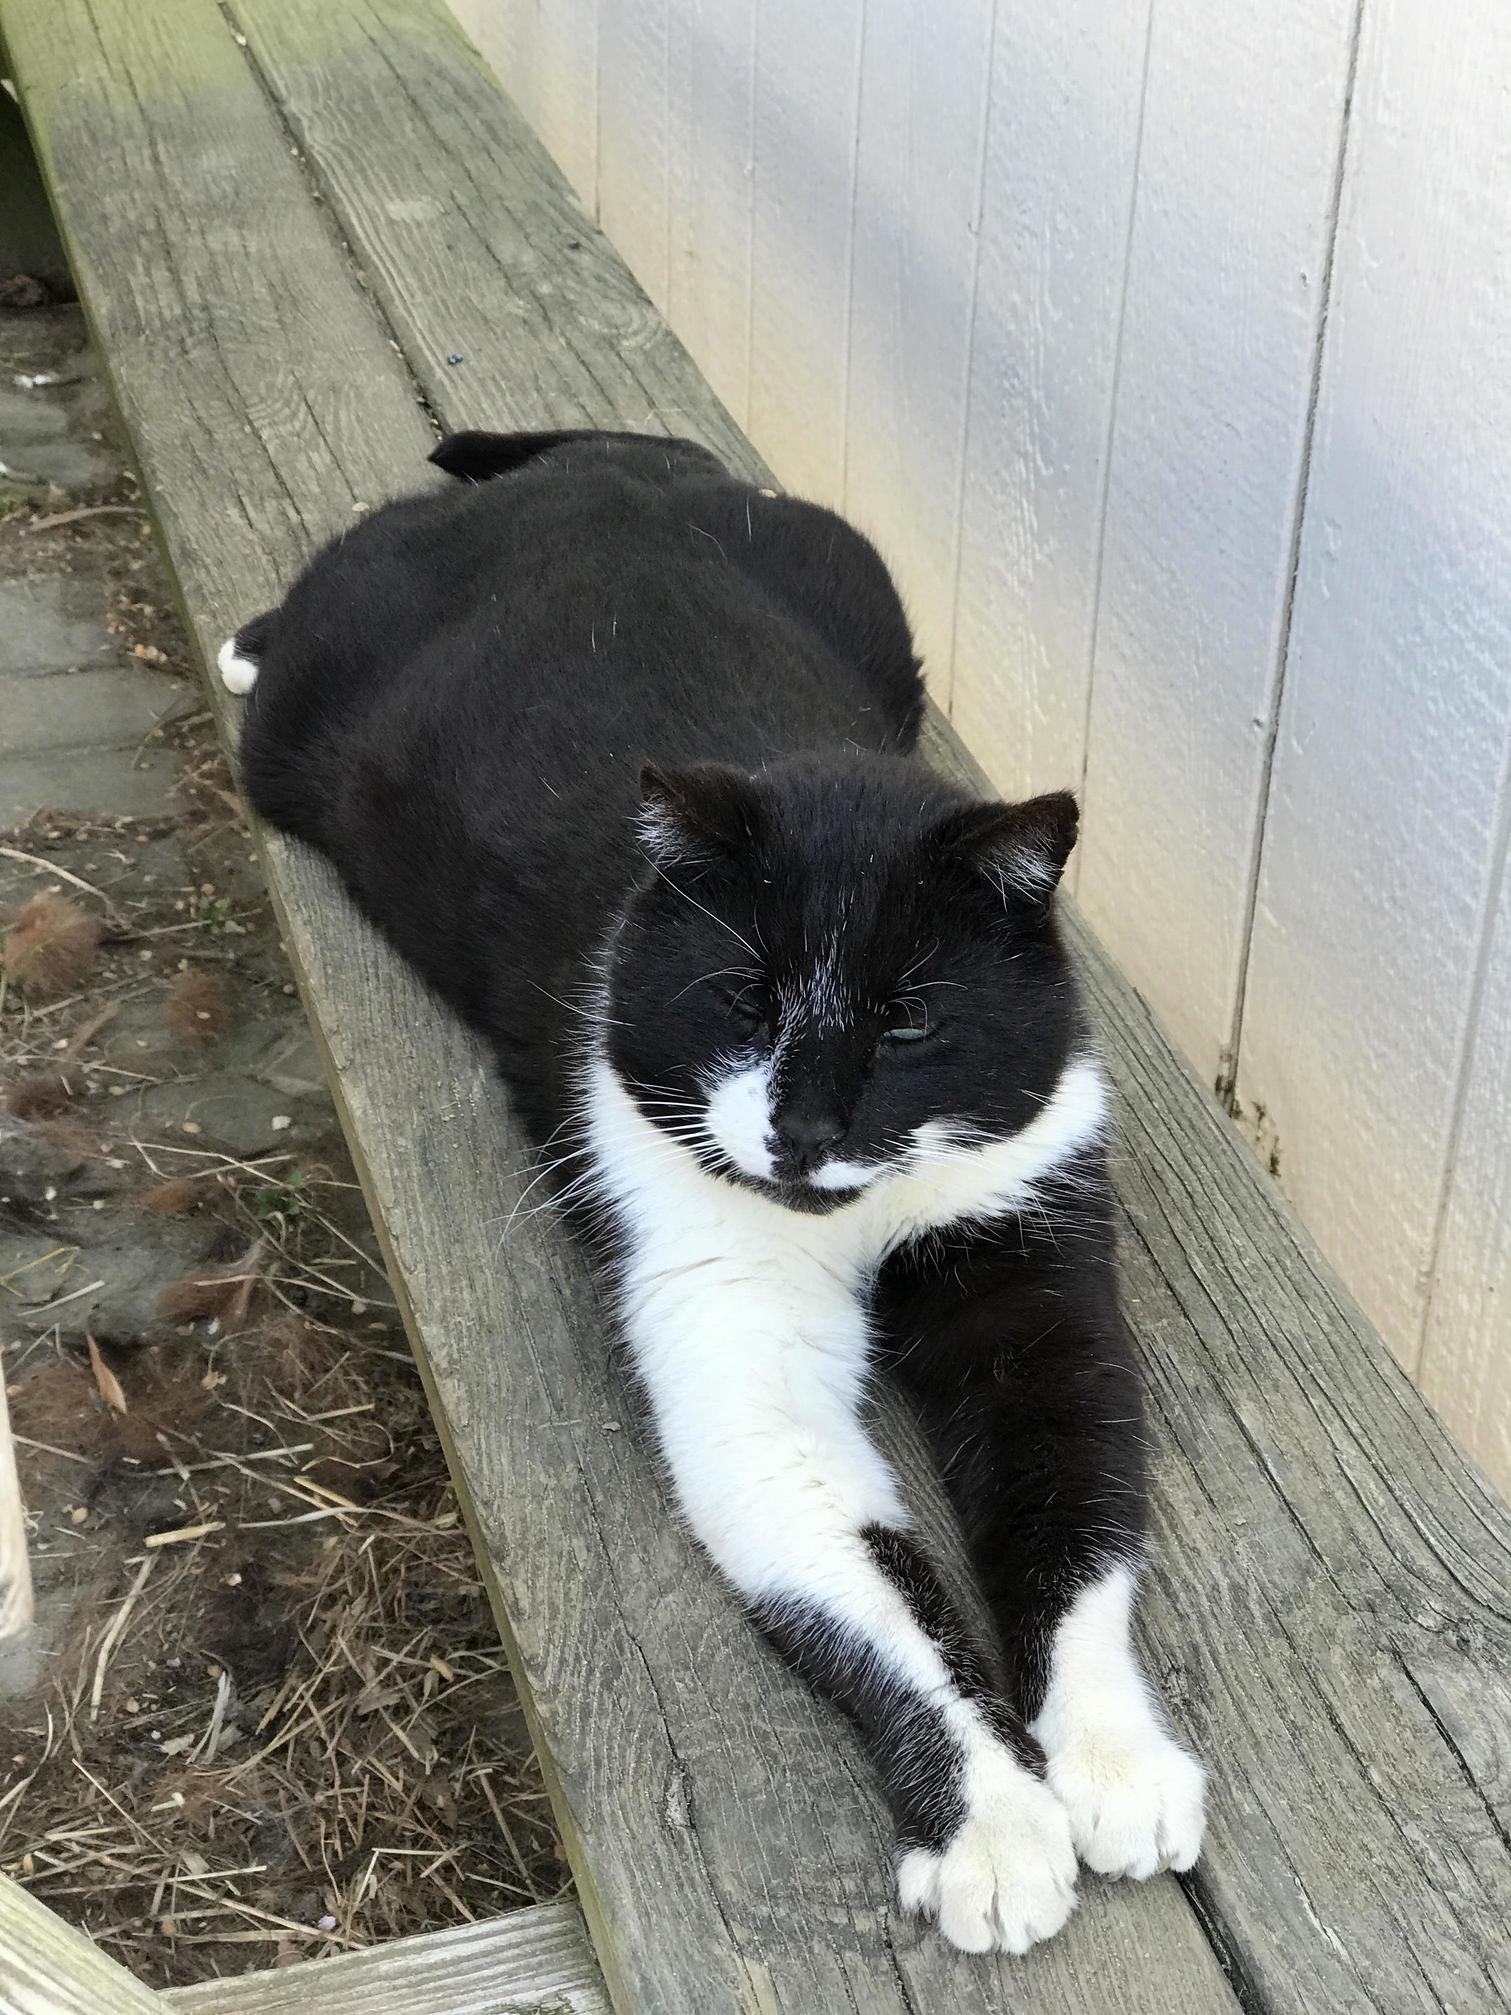 Its 85 and sunny at the barn so barn cat sploots